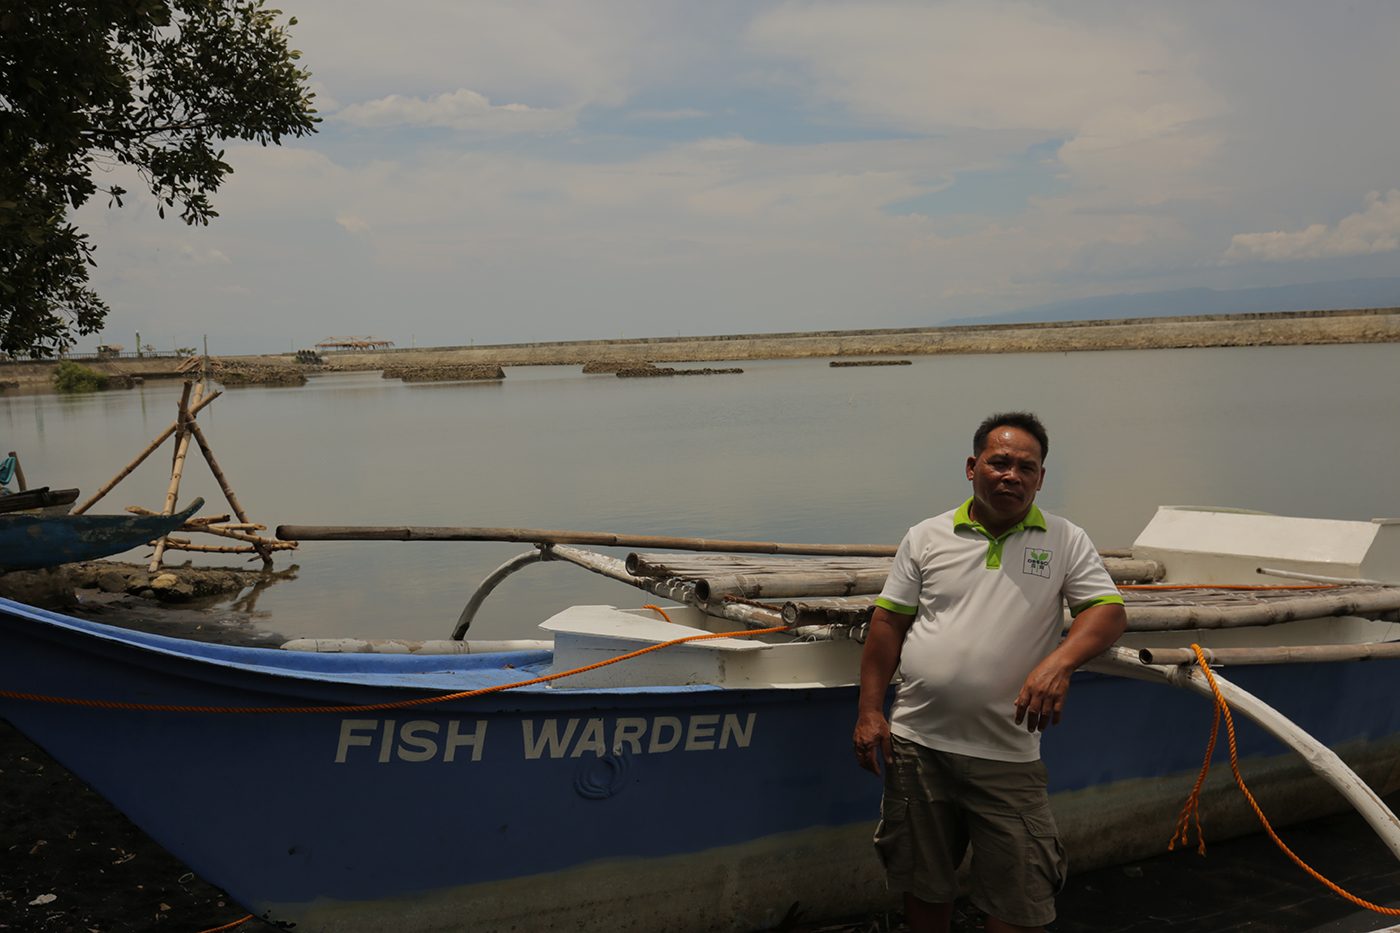 Balancing fisheries production and protection in Tañon Strait